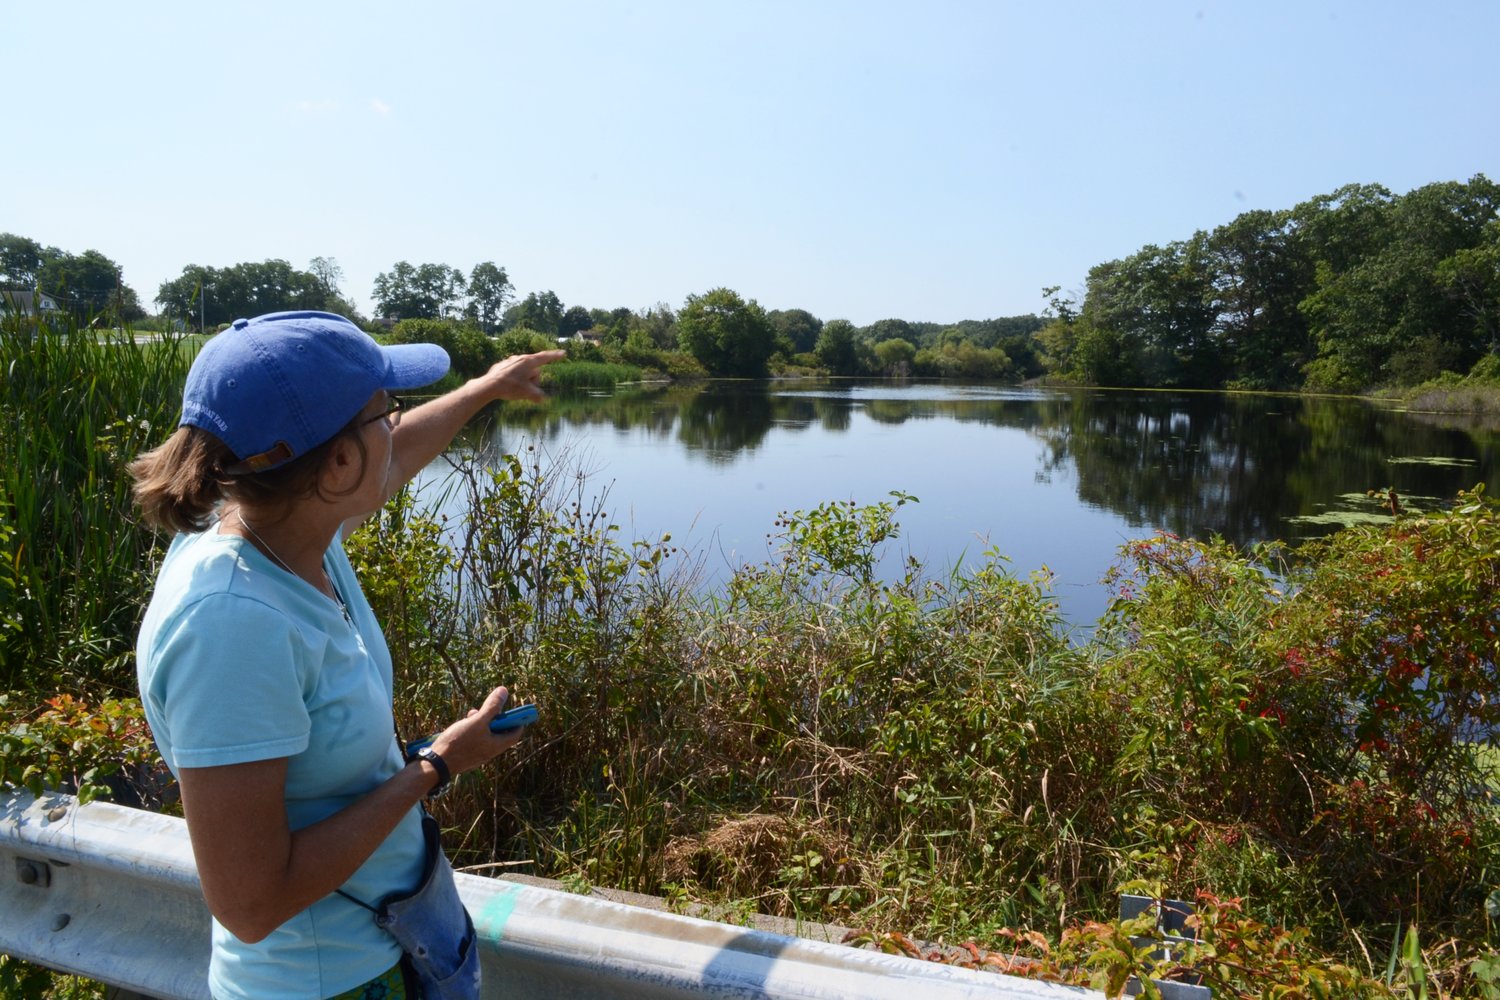 Wenley Ferguson, Director of Habitat Restoration for Save the Bay, looks out on the portion of the Kickemuit Reservoir just south of Schoolhouse Road. This scene will look much different once the two dams blockading the reservoir are demolished in the coming years.